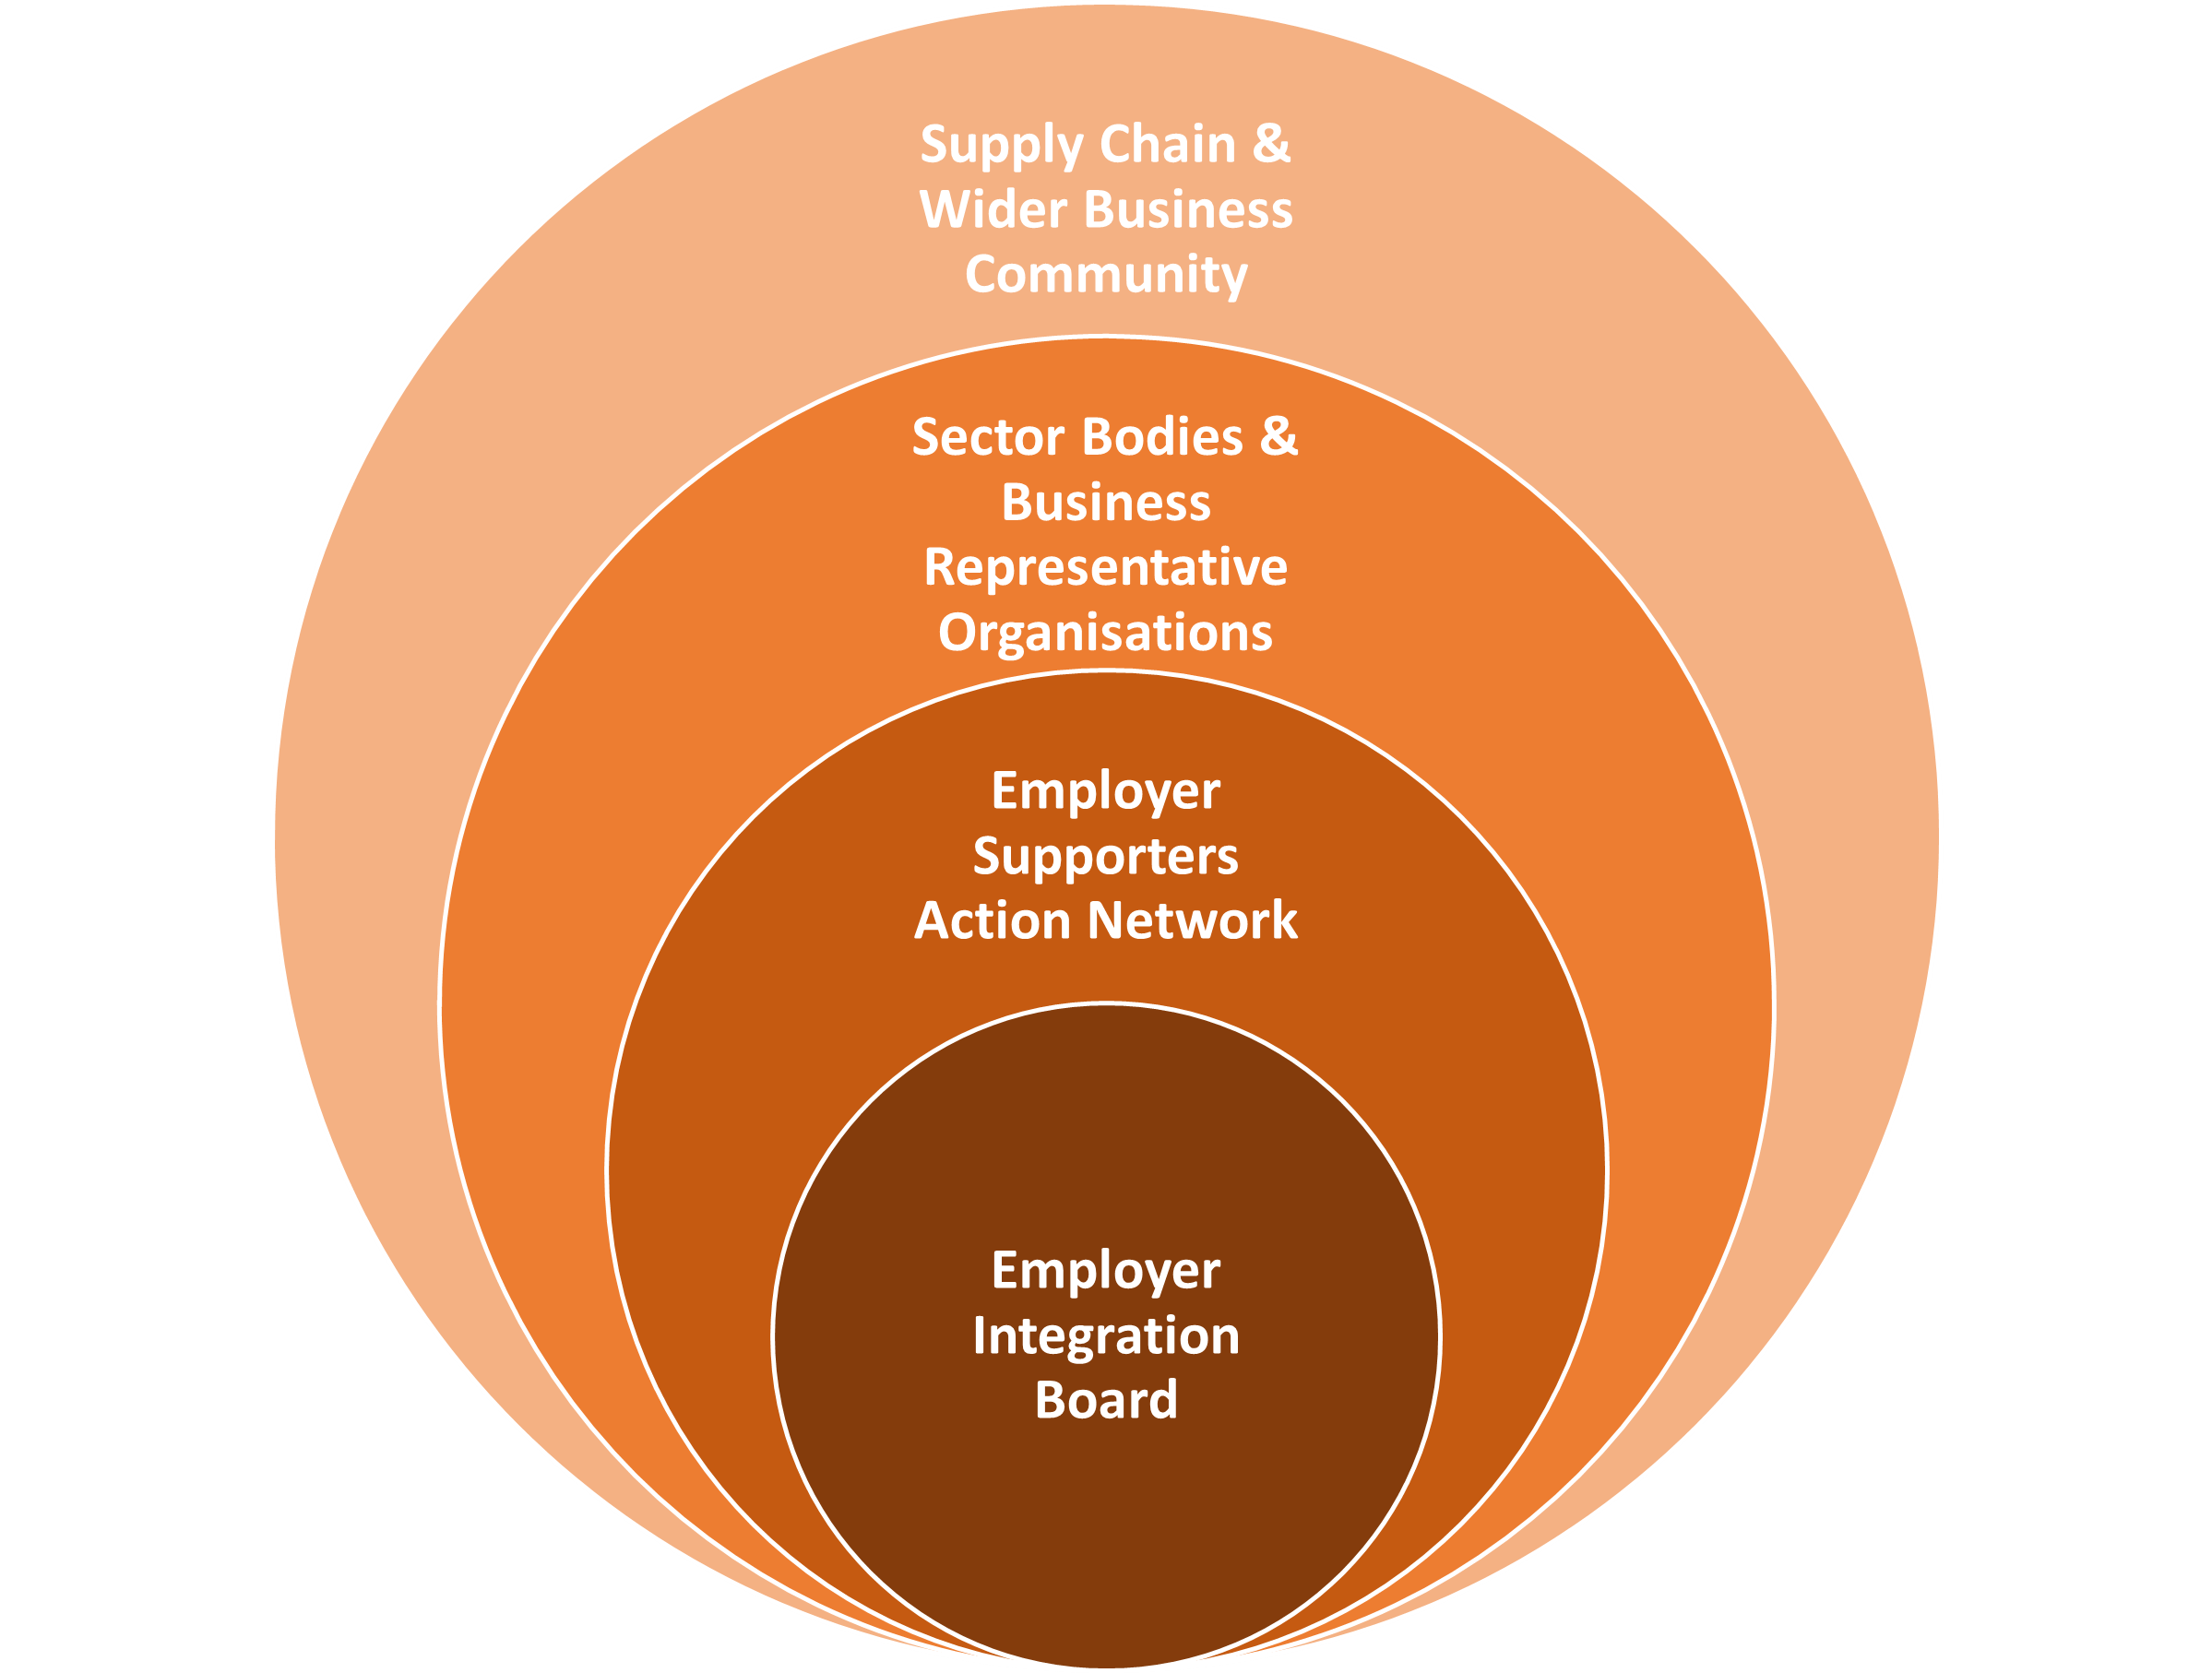 Image showing how the model for change in the technical education city region moves out from the Employer Integration Board, through the Employer Supporters Action Network, to Sector Bodies and then the Wider Business Community.